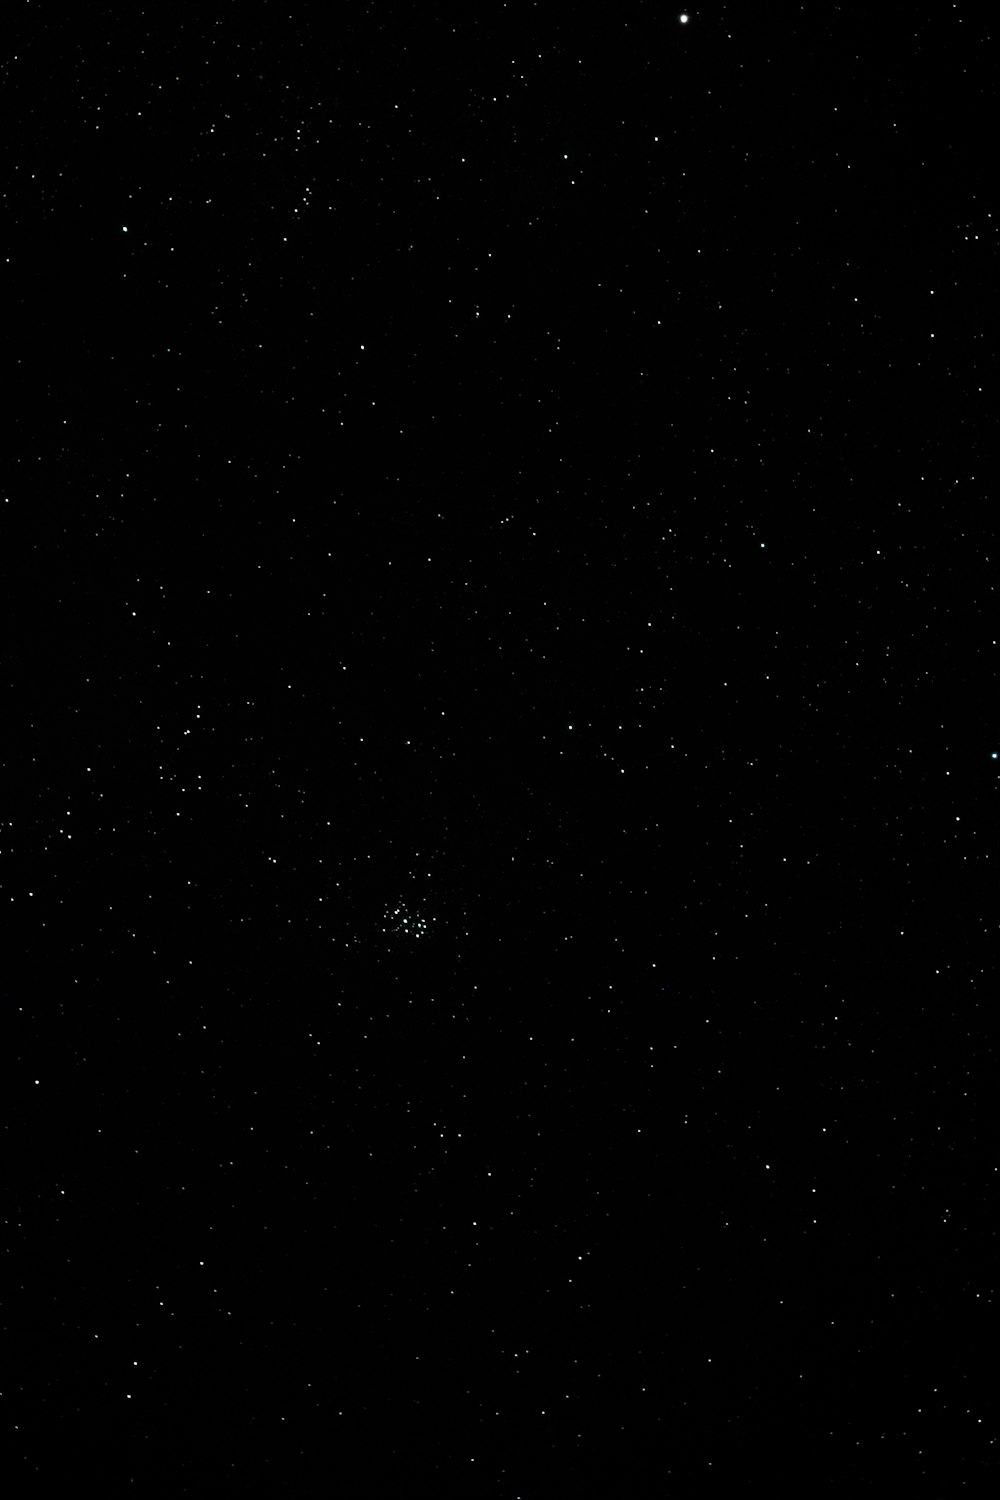 a black background with stars and a plane in the sky